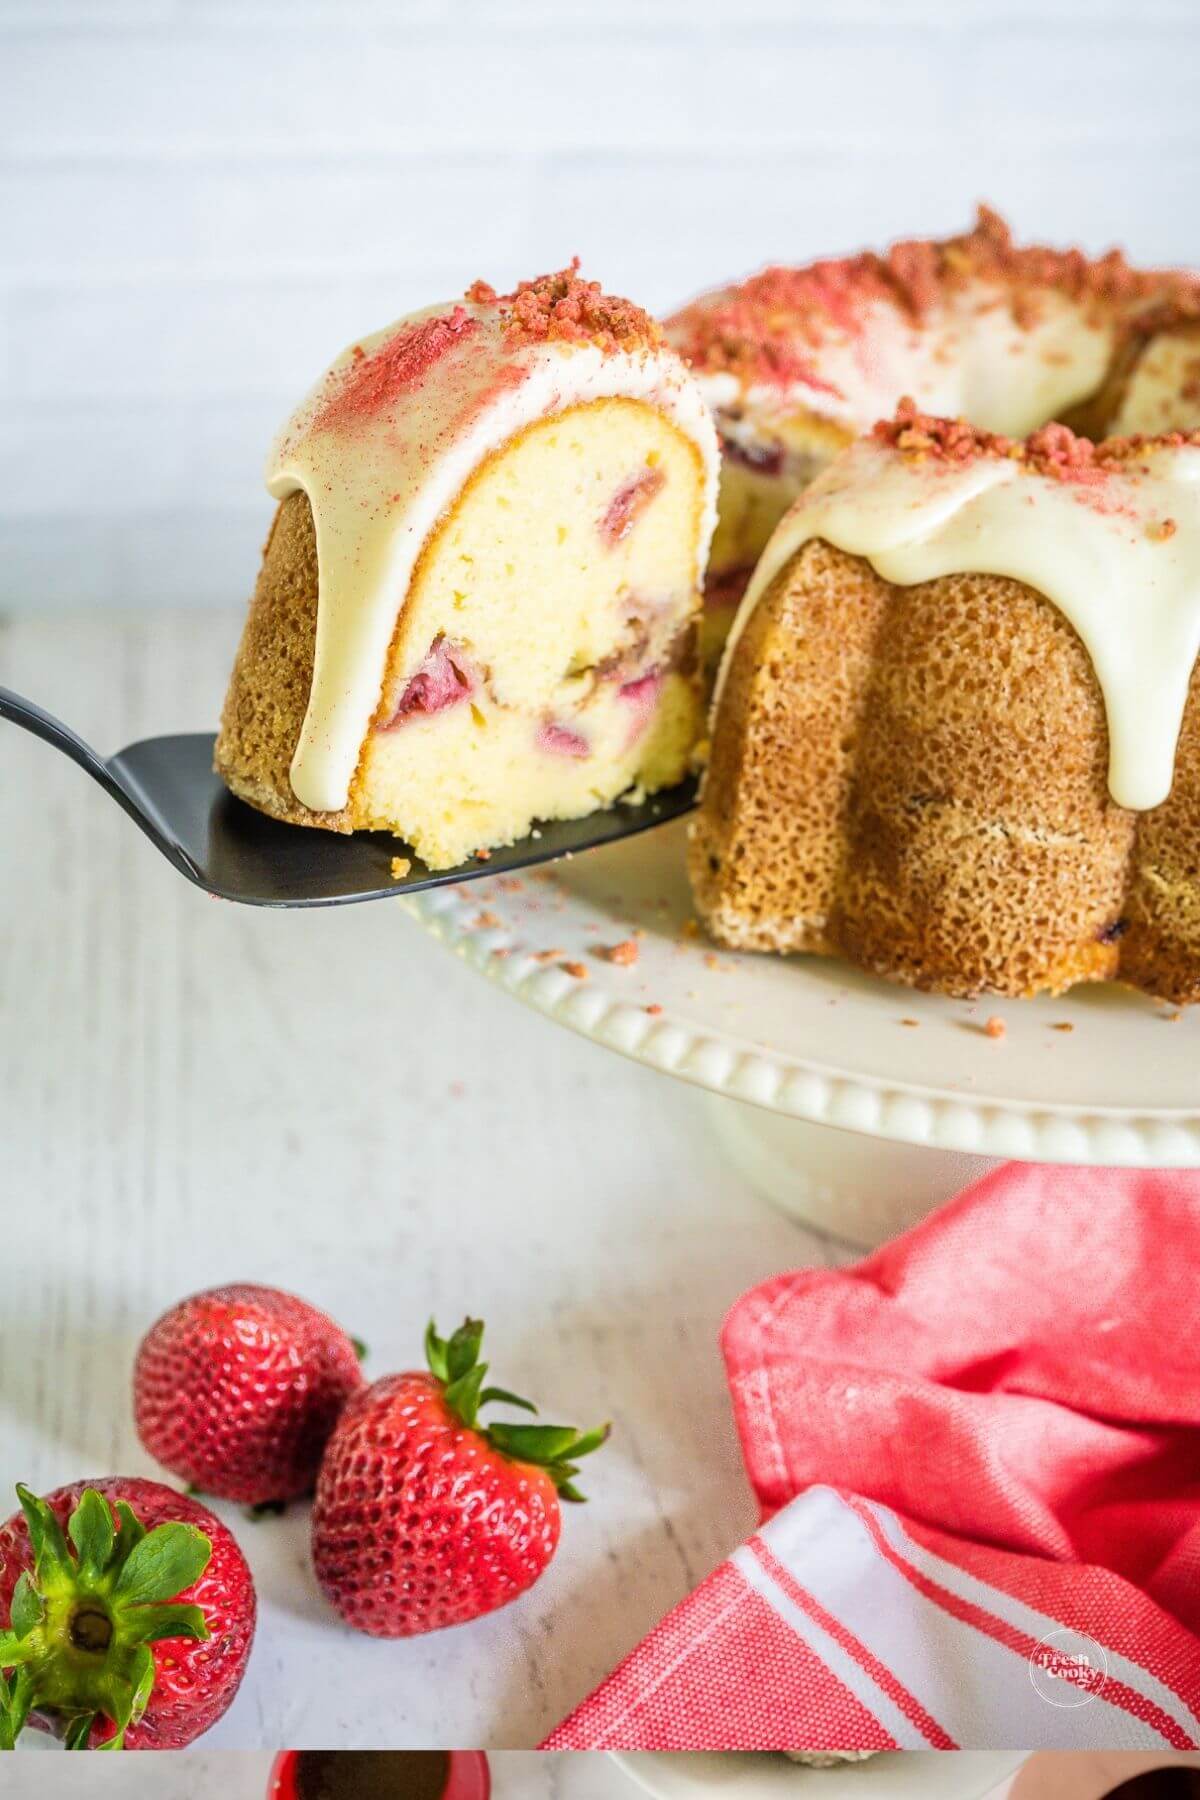 Removing a slice from the strawberry bundt cake.